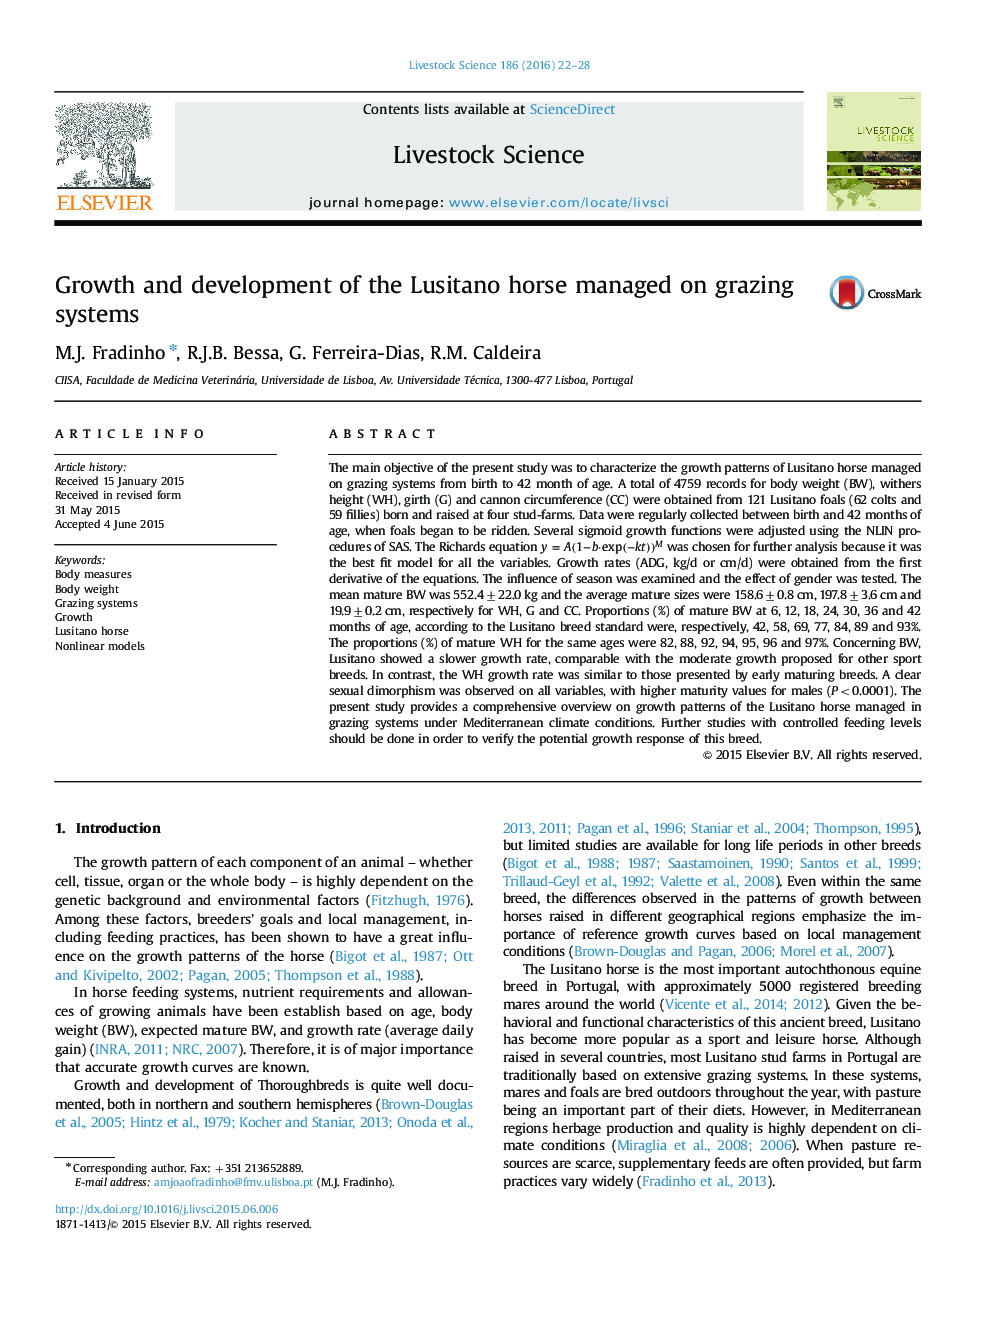 Growth and development of the Lusitano horse managed on grazing systems